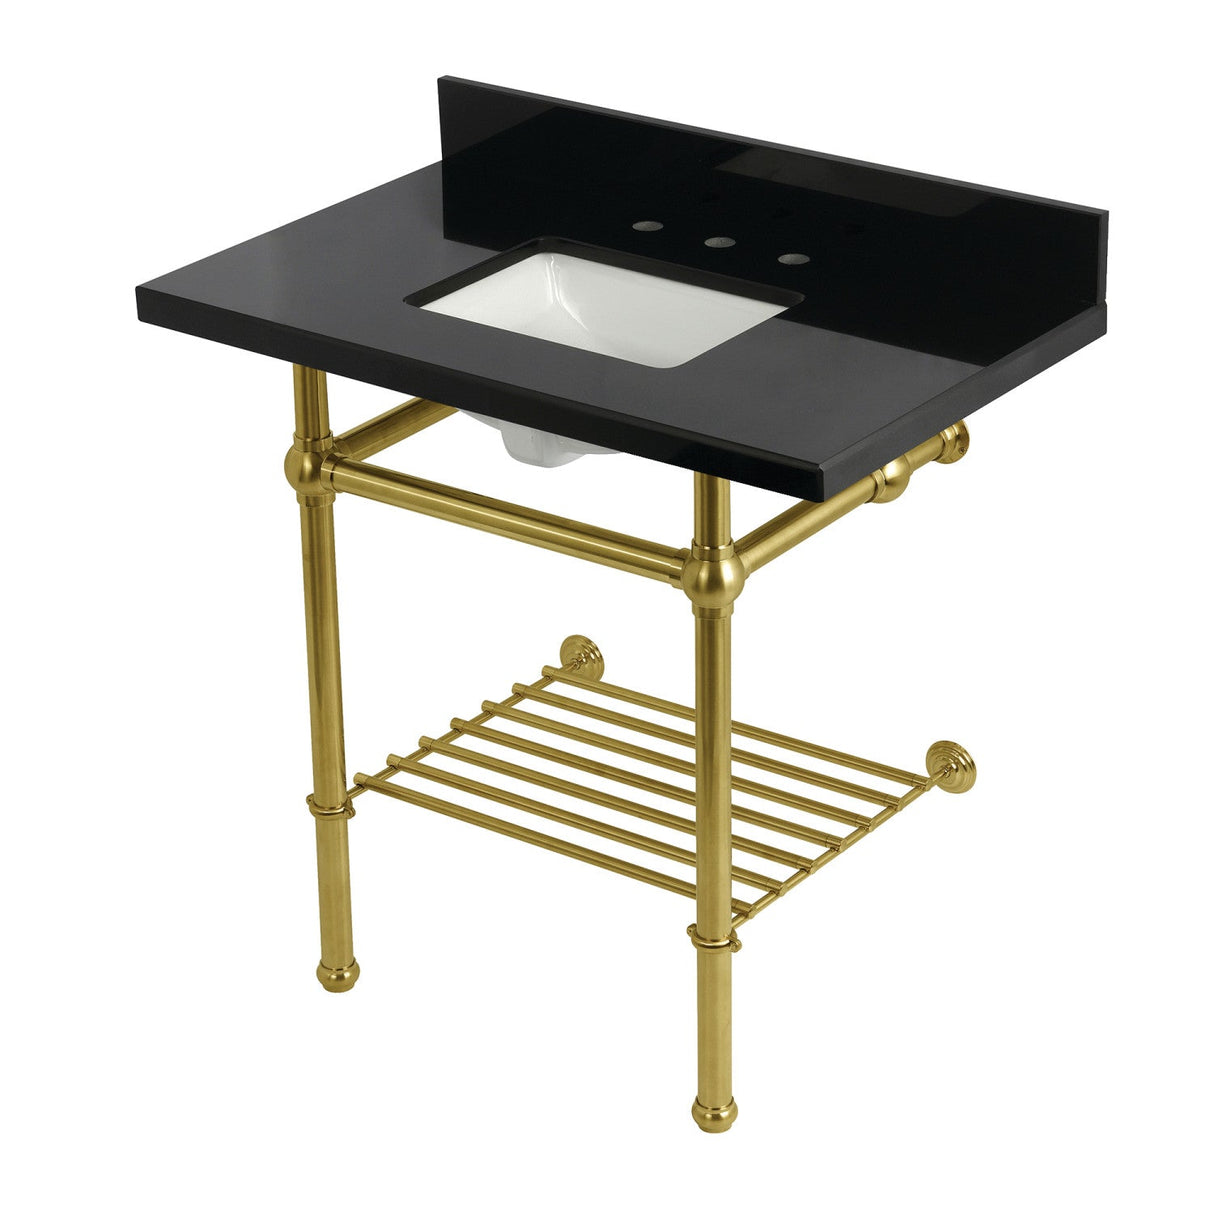 Templeton KVPK36KBSQB7 36-Inch Console Sink with Brass Legs (8-Inch, 3 Hole), Black Granite/Brushed Brass